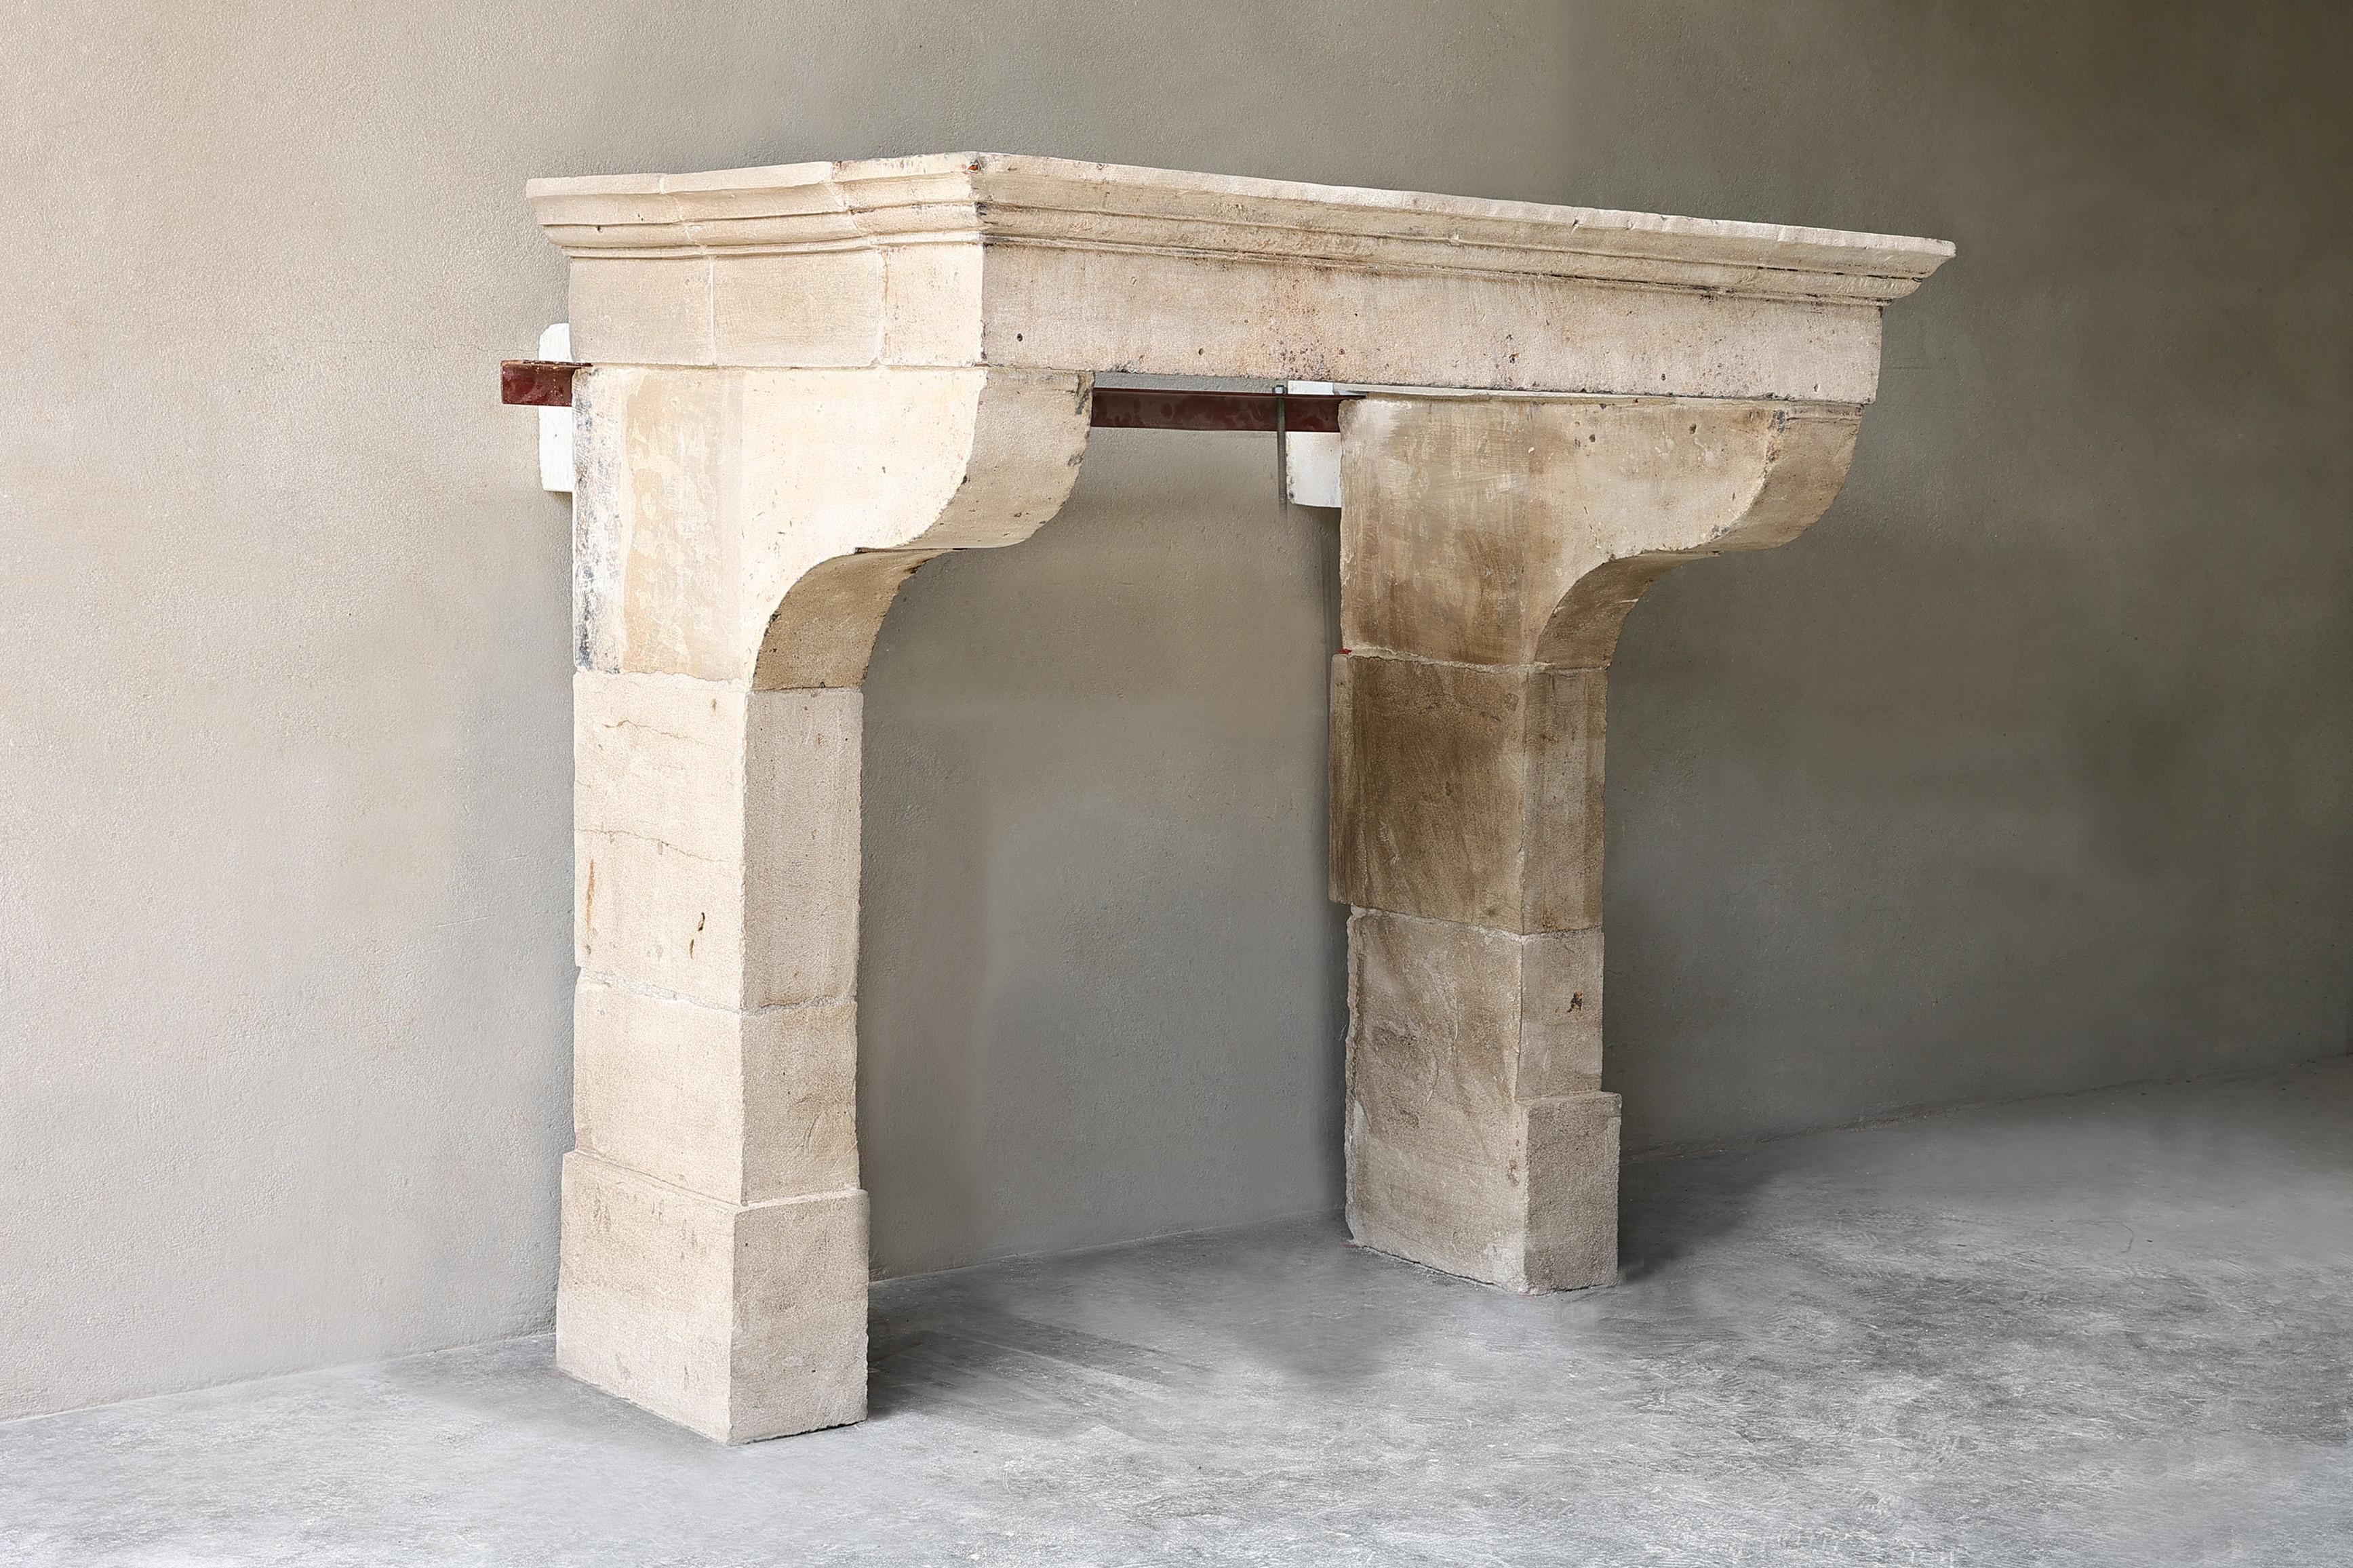 Beautiful antique fireplace because of its simplicity! An old French limestone mantle from the 19th century with a beautiful molding (lines), curved legs and elegant front part. A fireplace with accessible dimensions that can be used in many